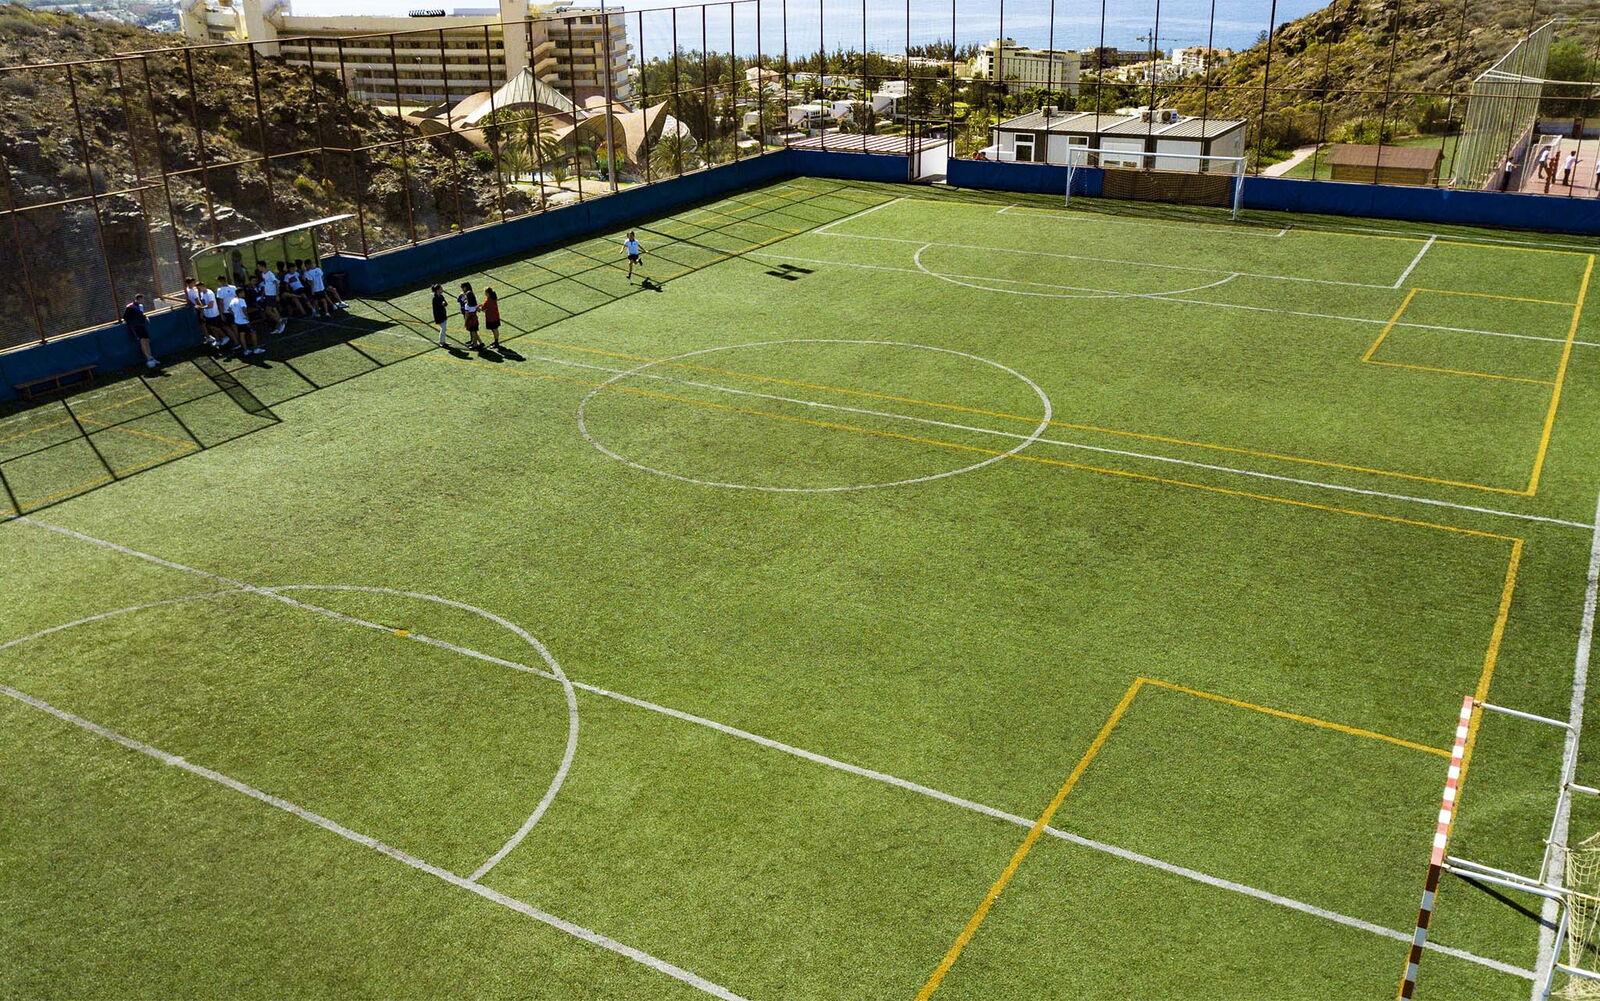 3 reasons why an artificial grass lawn is superior for sports